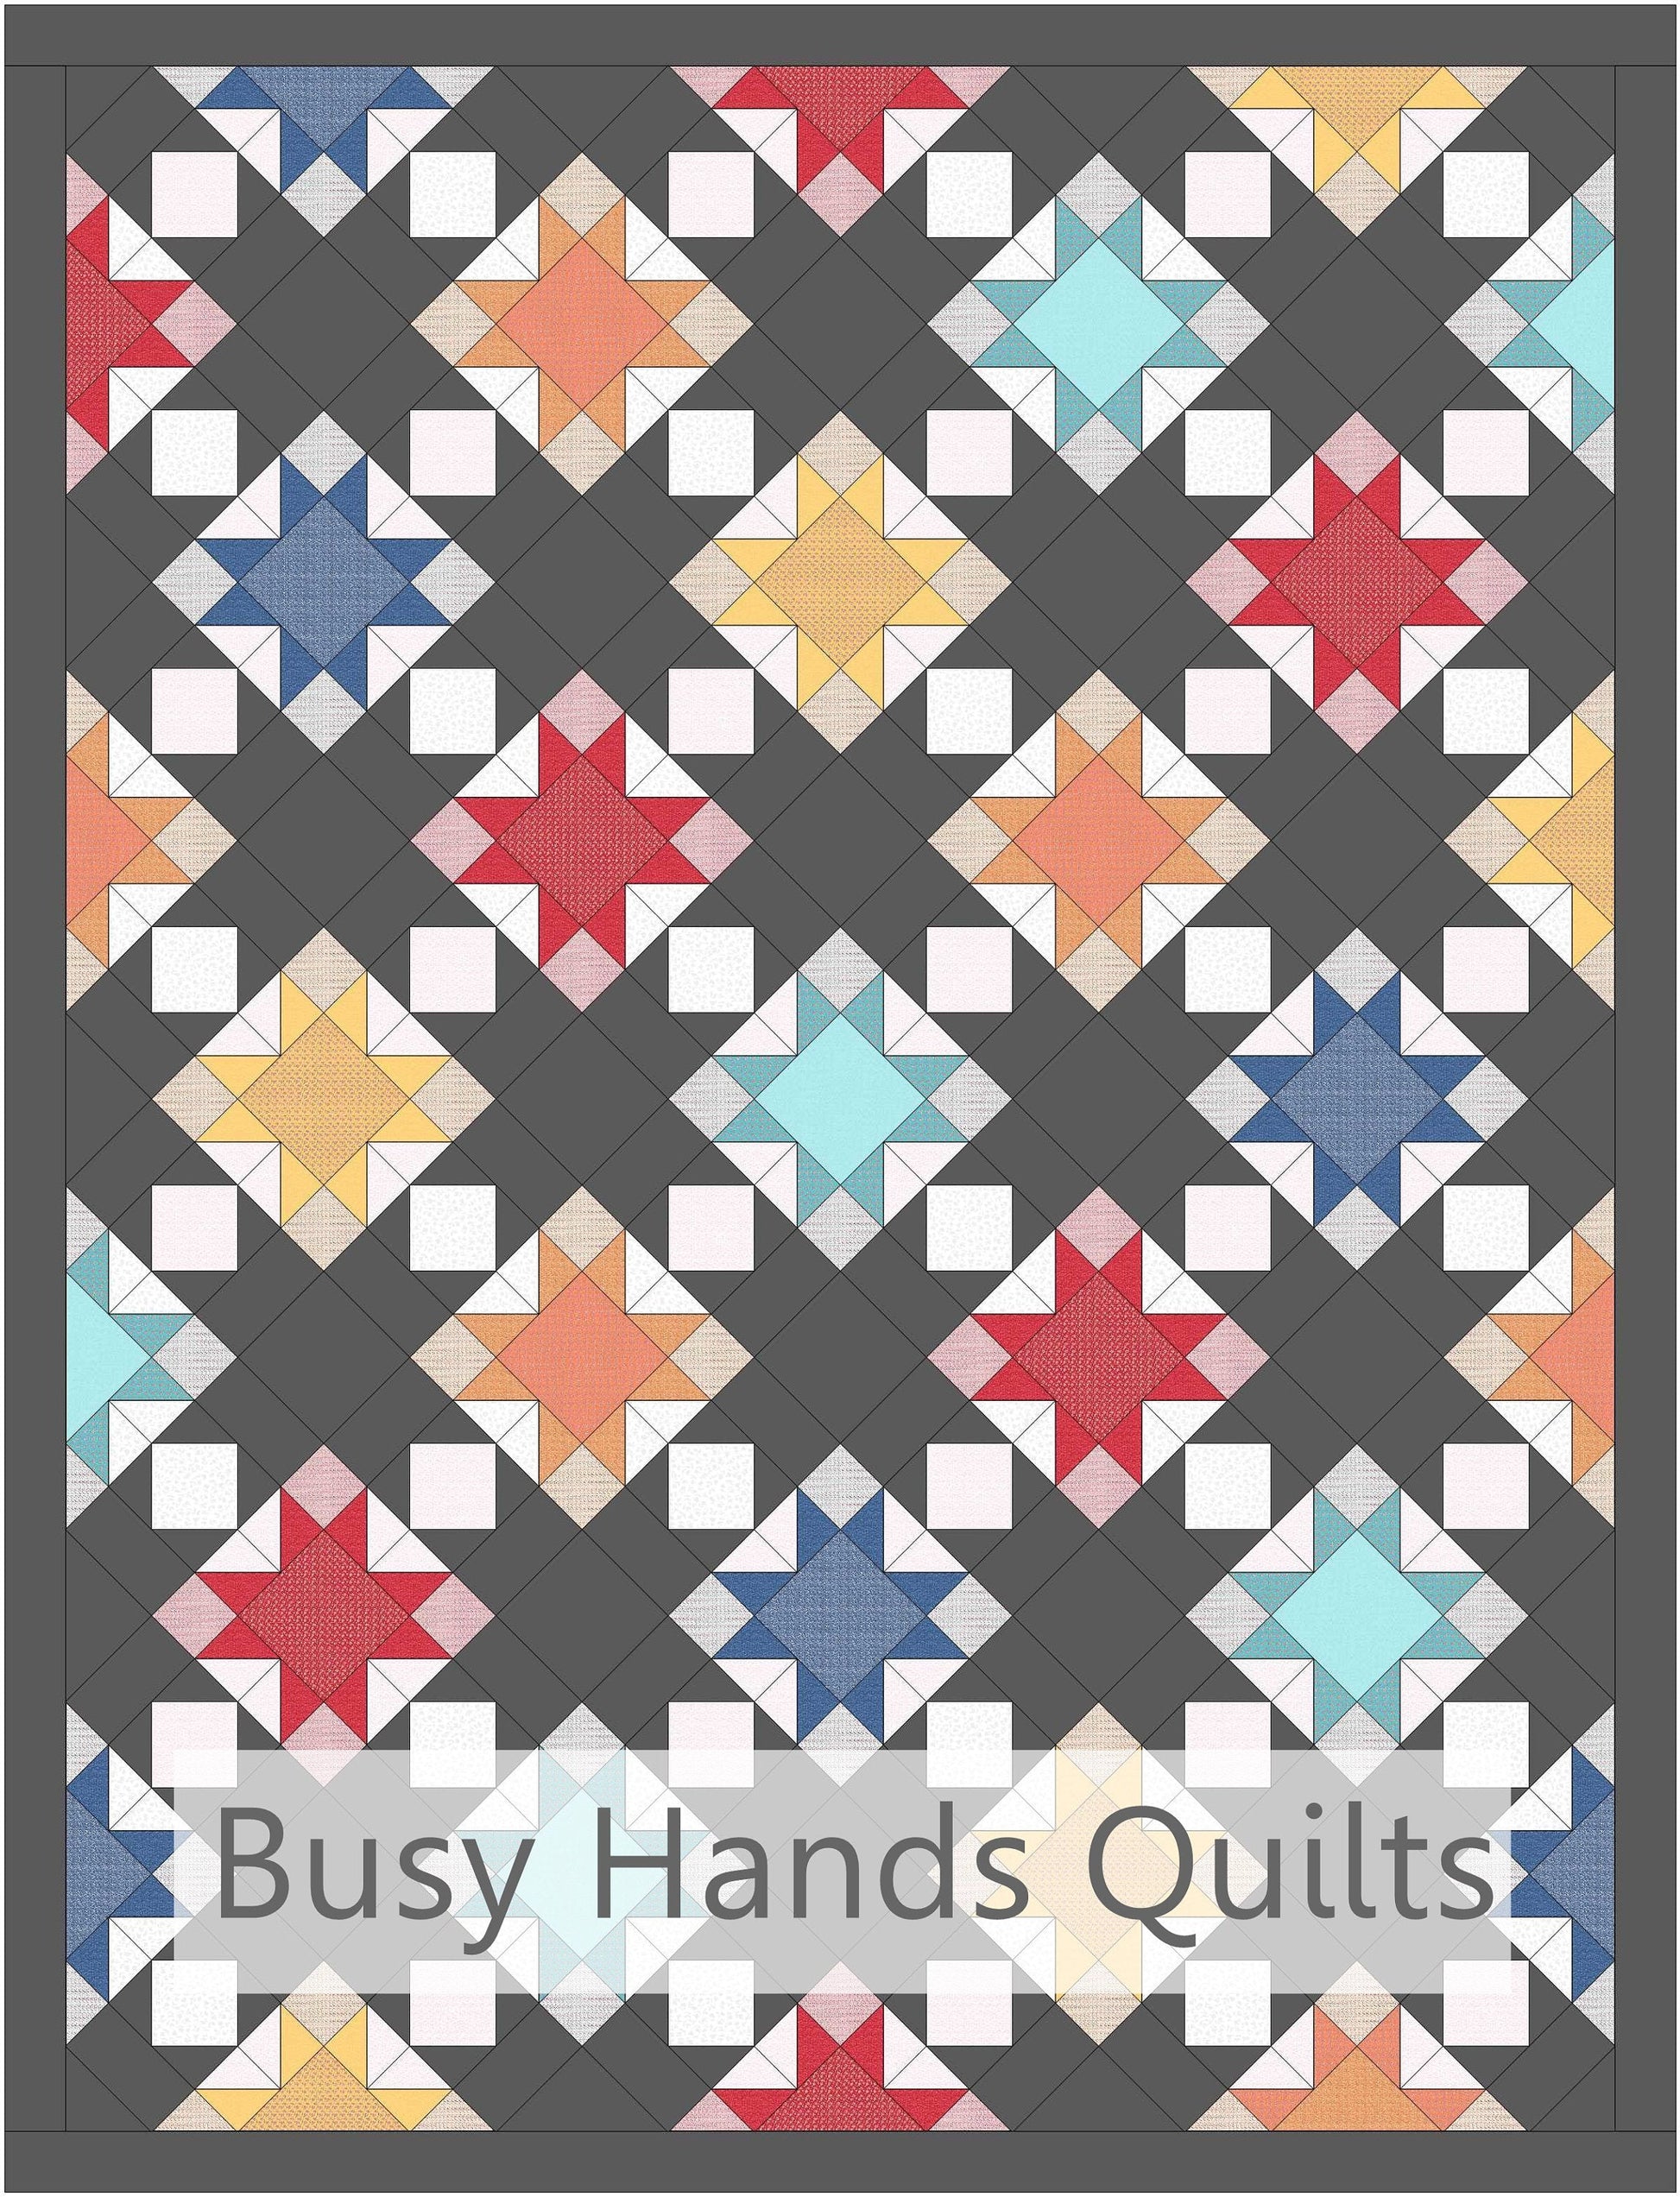 Night Sky Quilt Pattern PDF DOWNLOAD Busy Hands Quilts $12.99